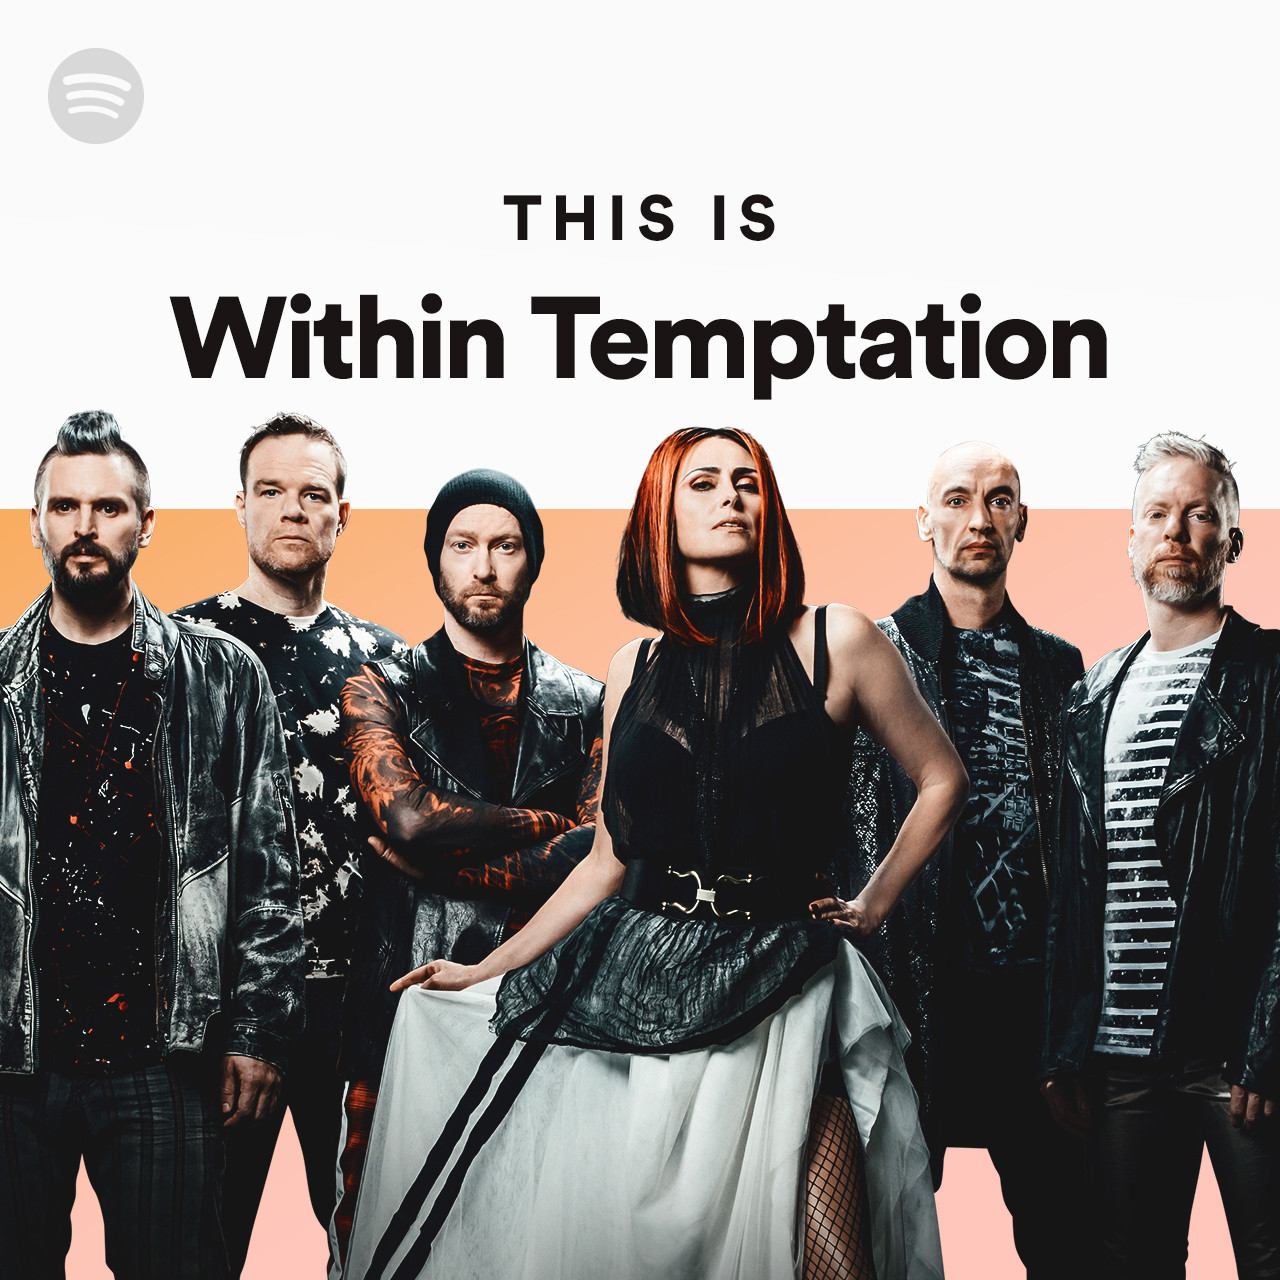 This Is Within Temptation